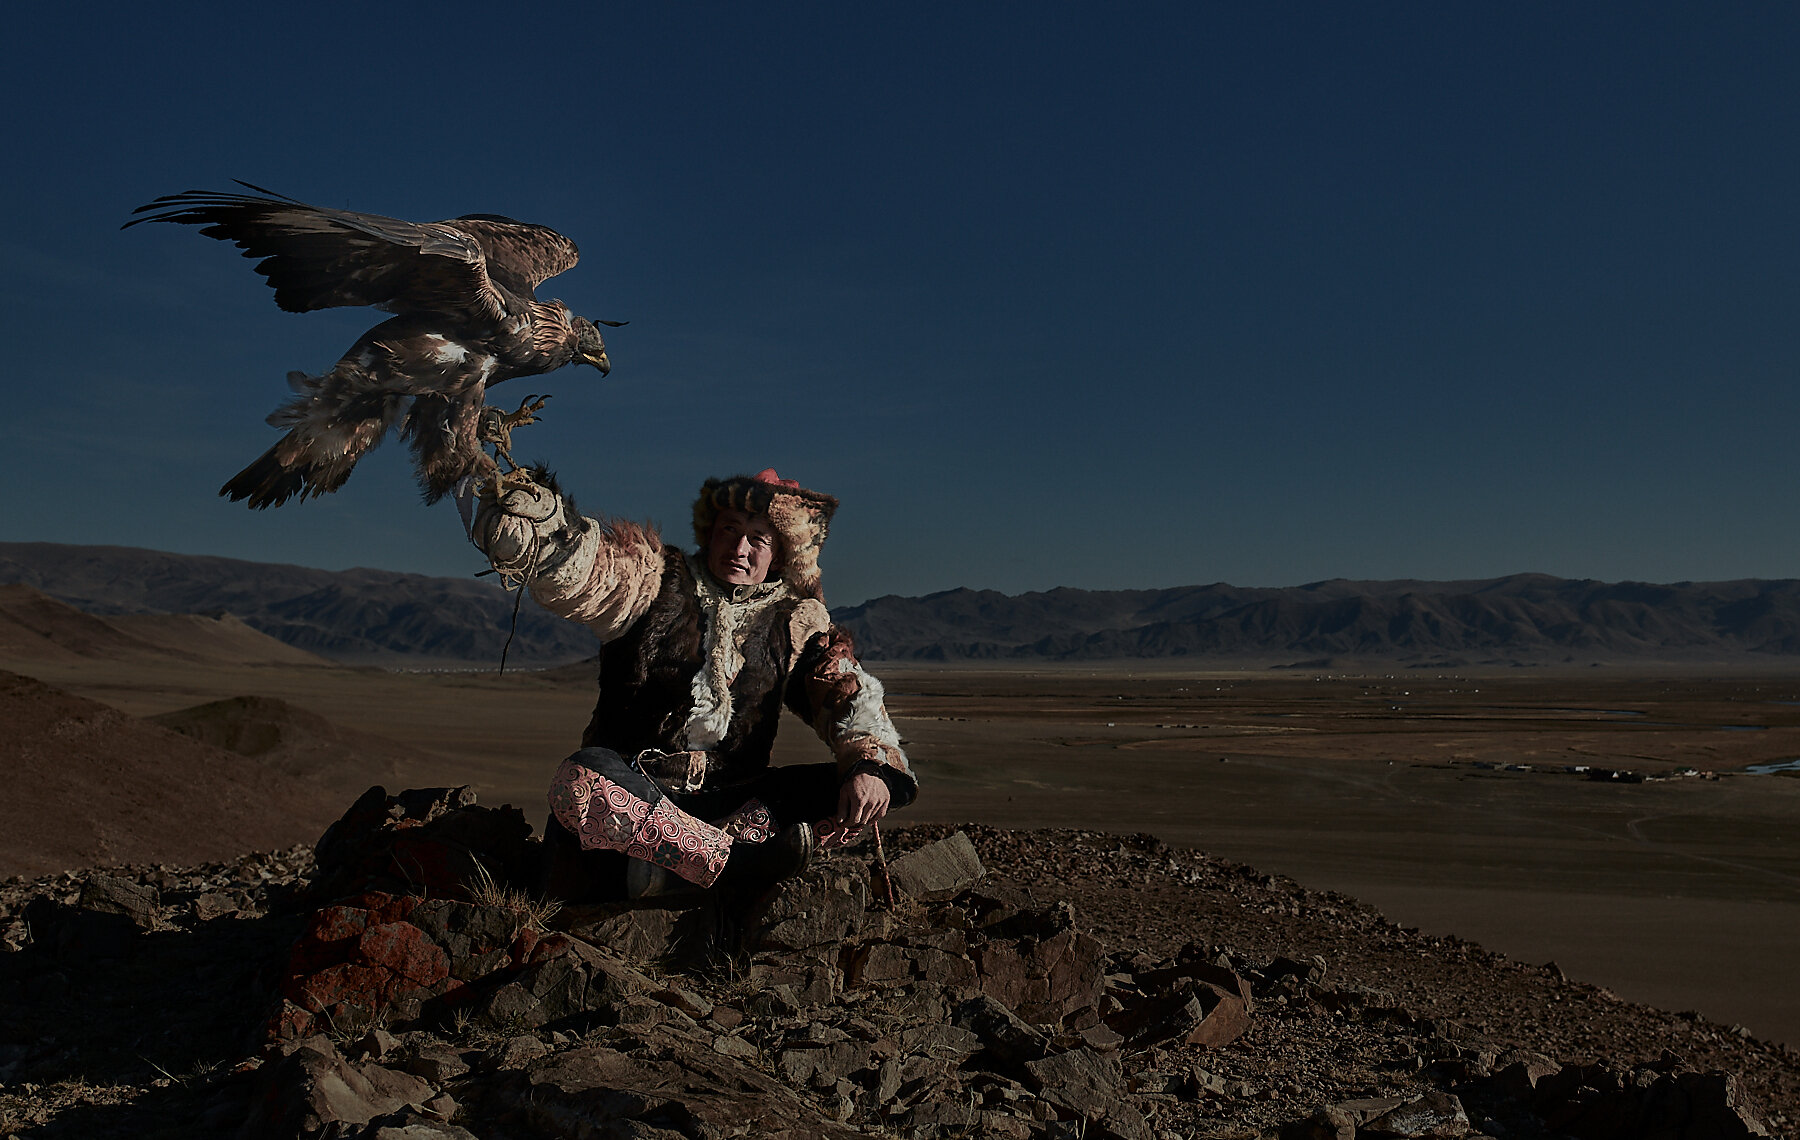 Tileyjan, a third generation eagle hunter with his eagle in action